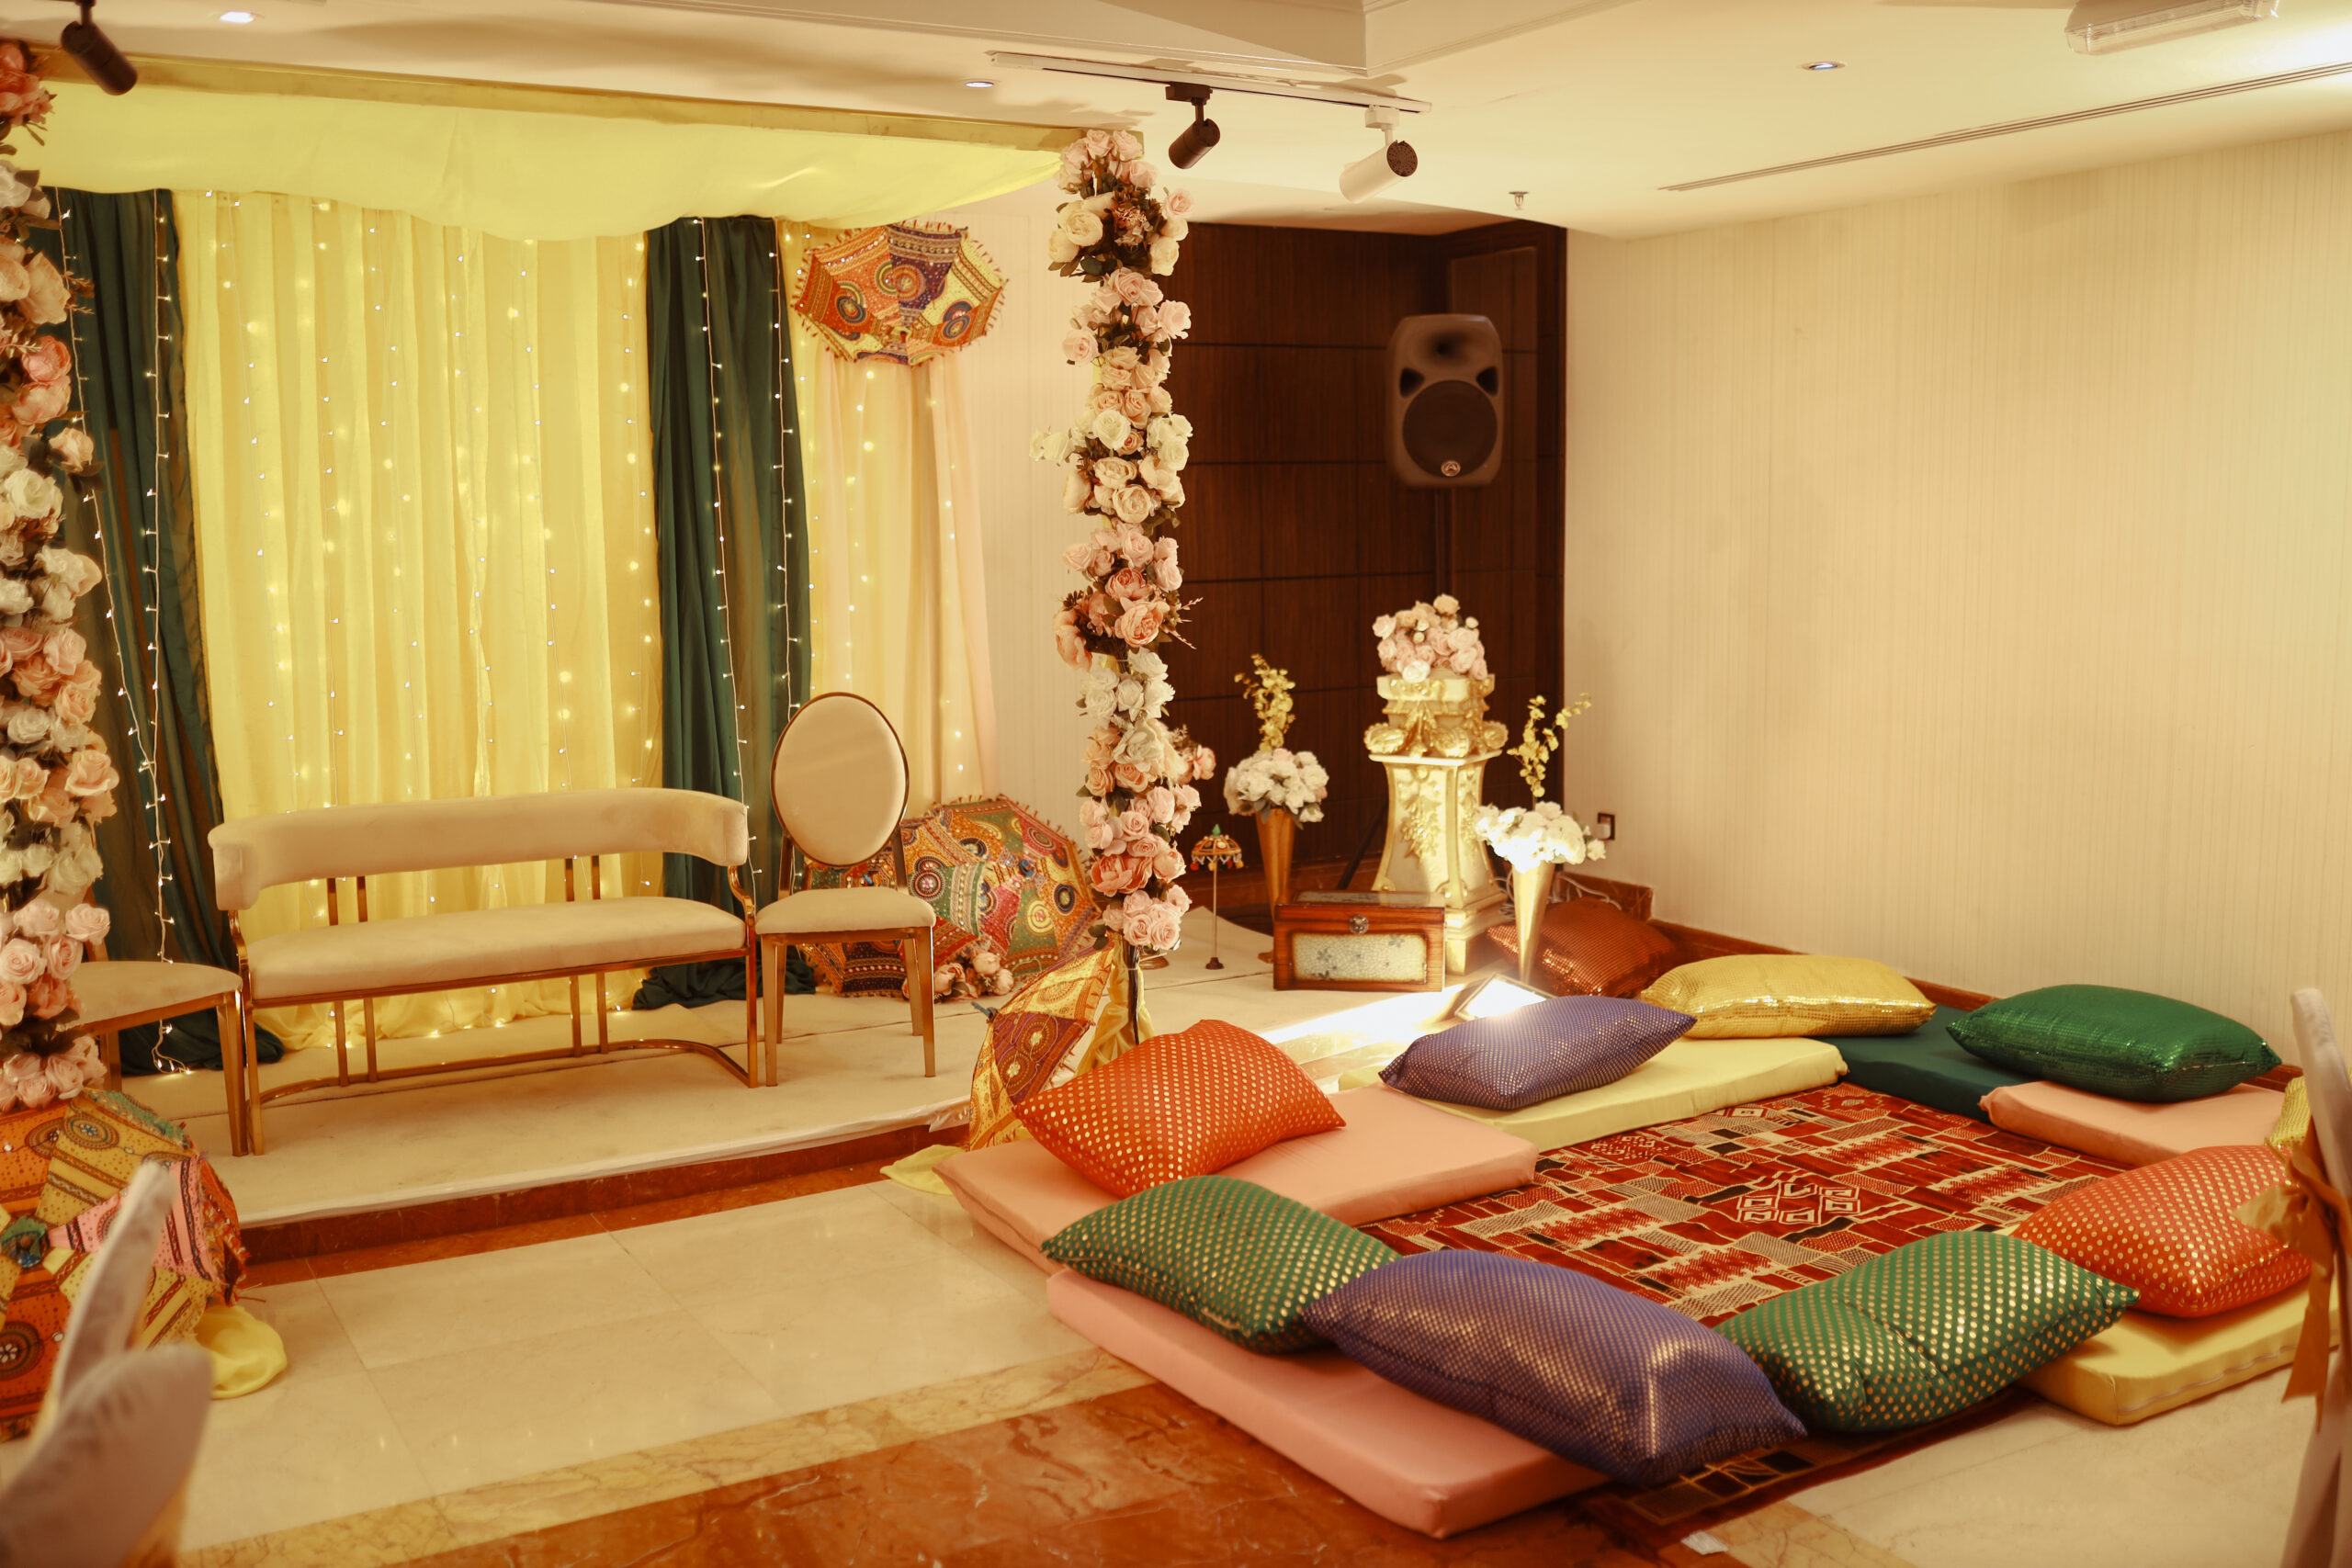 a room with colorful pillows and a flower arrangement